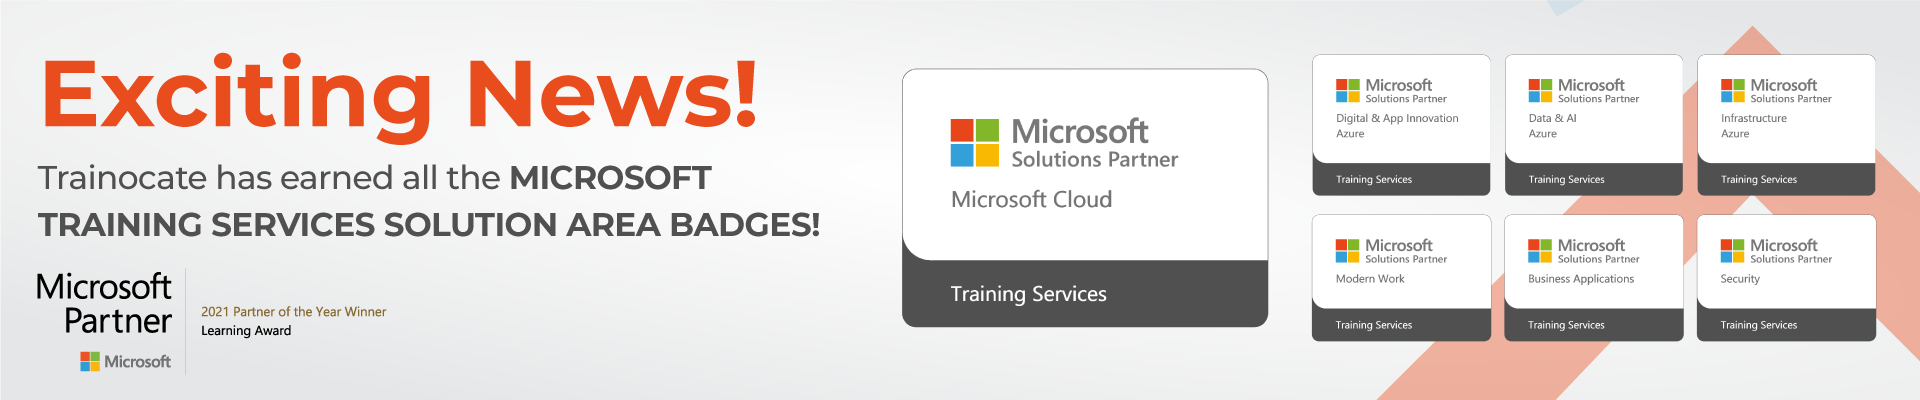 trainocate-earns-ms-service-solution-badges